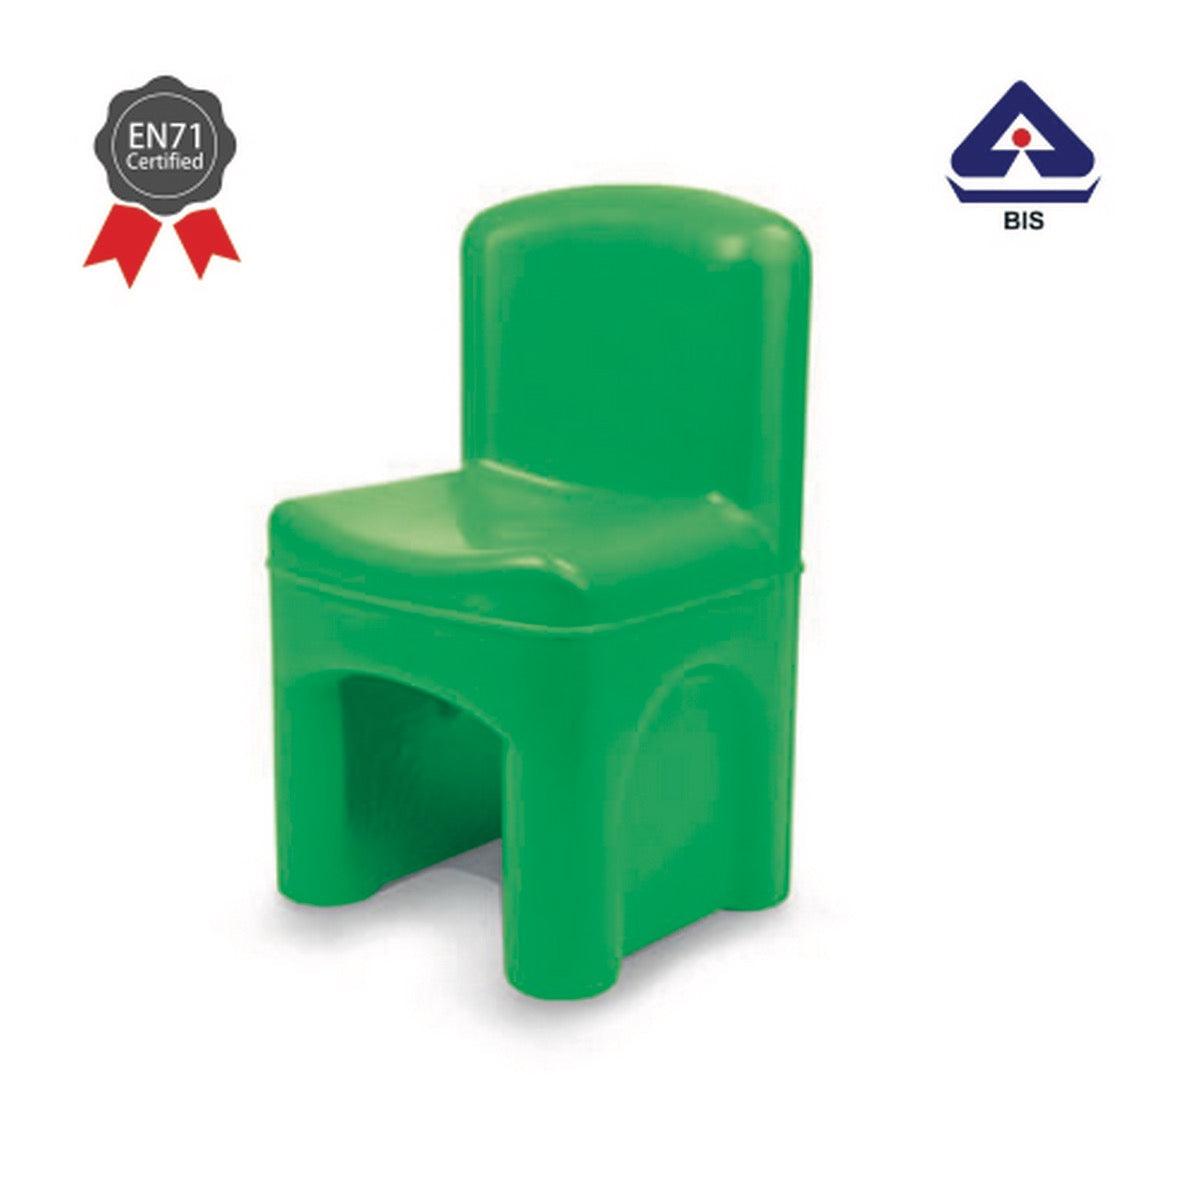 Ok Play Master Seat Chair For Little Kids, Perfect For Home And School, Green, 2 to 4 Years